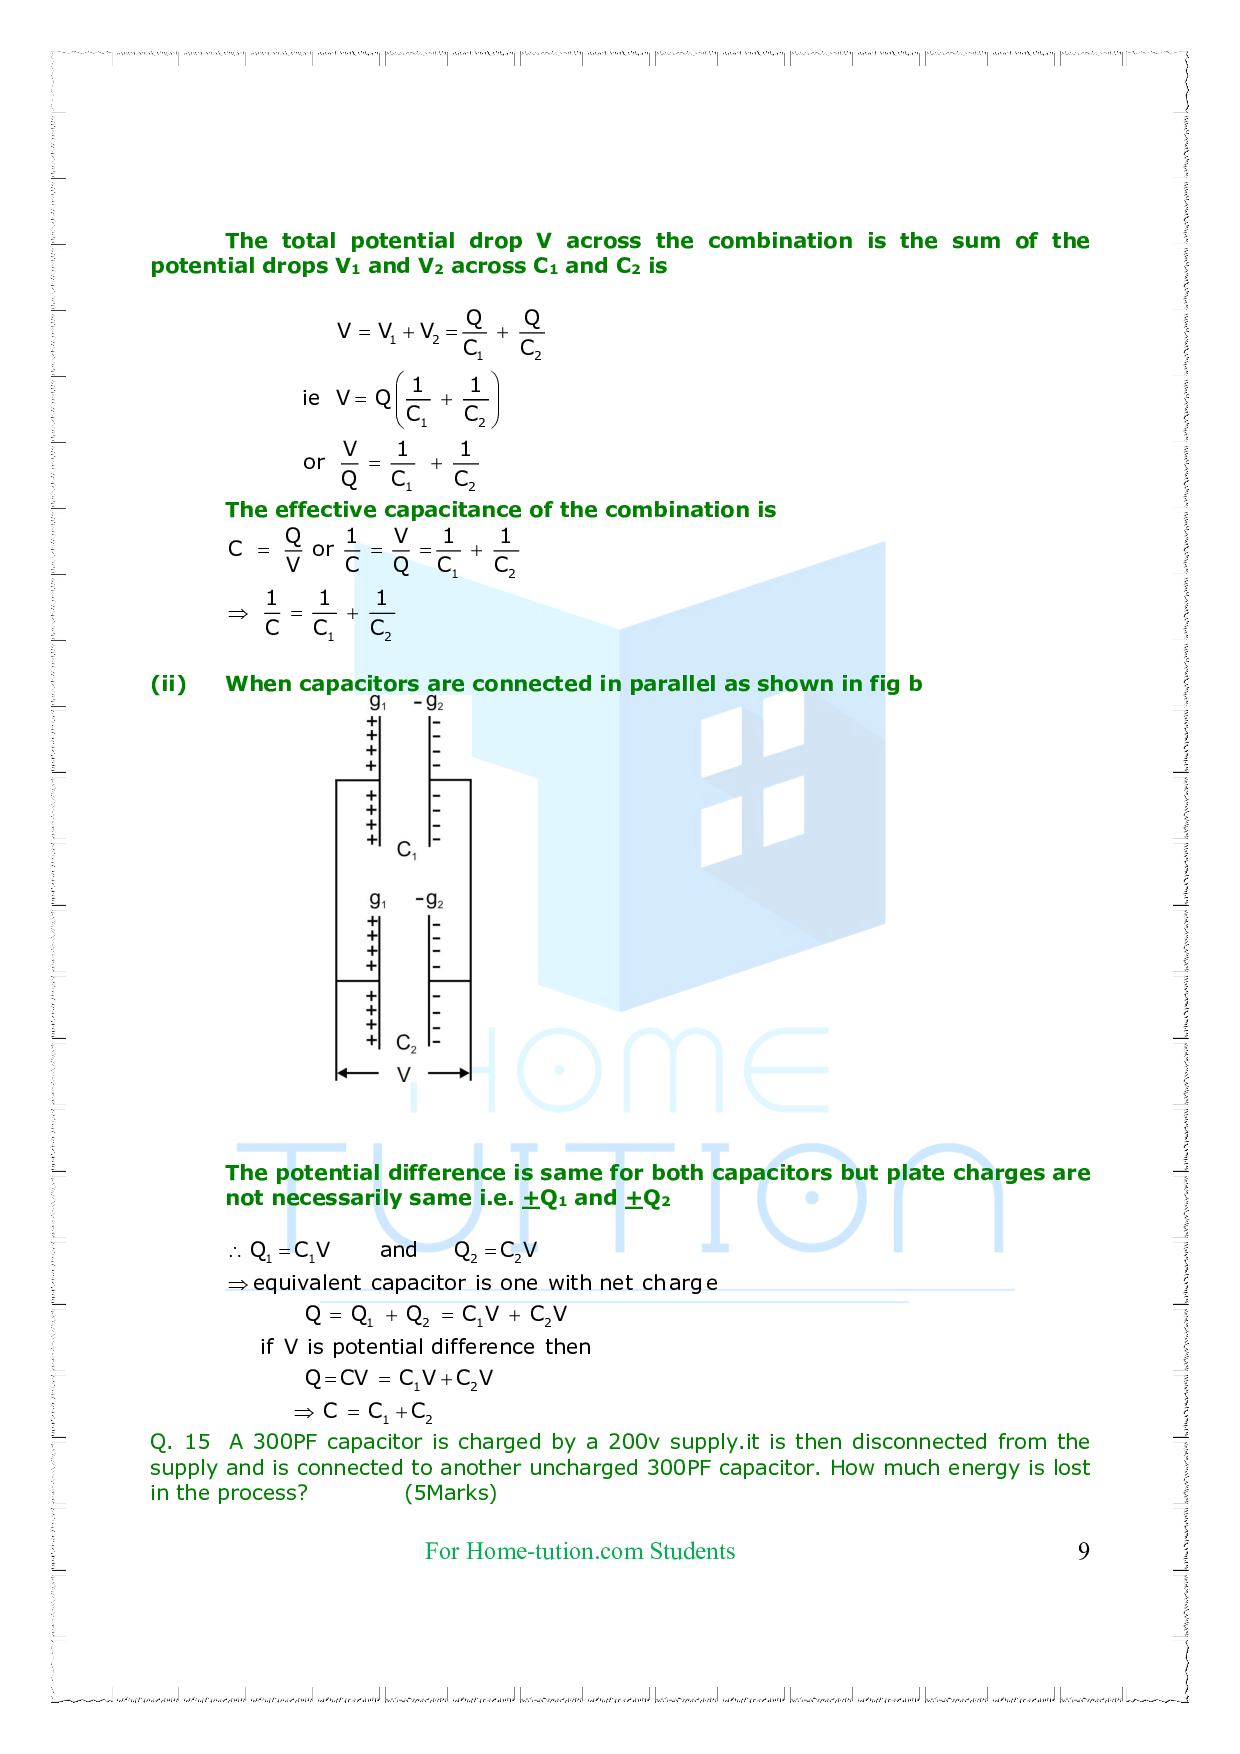 Chapter 2 Electrostatic Potential and Capacitance Questions